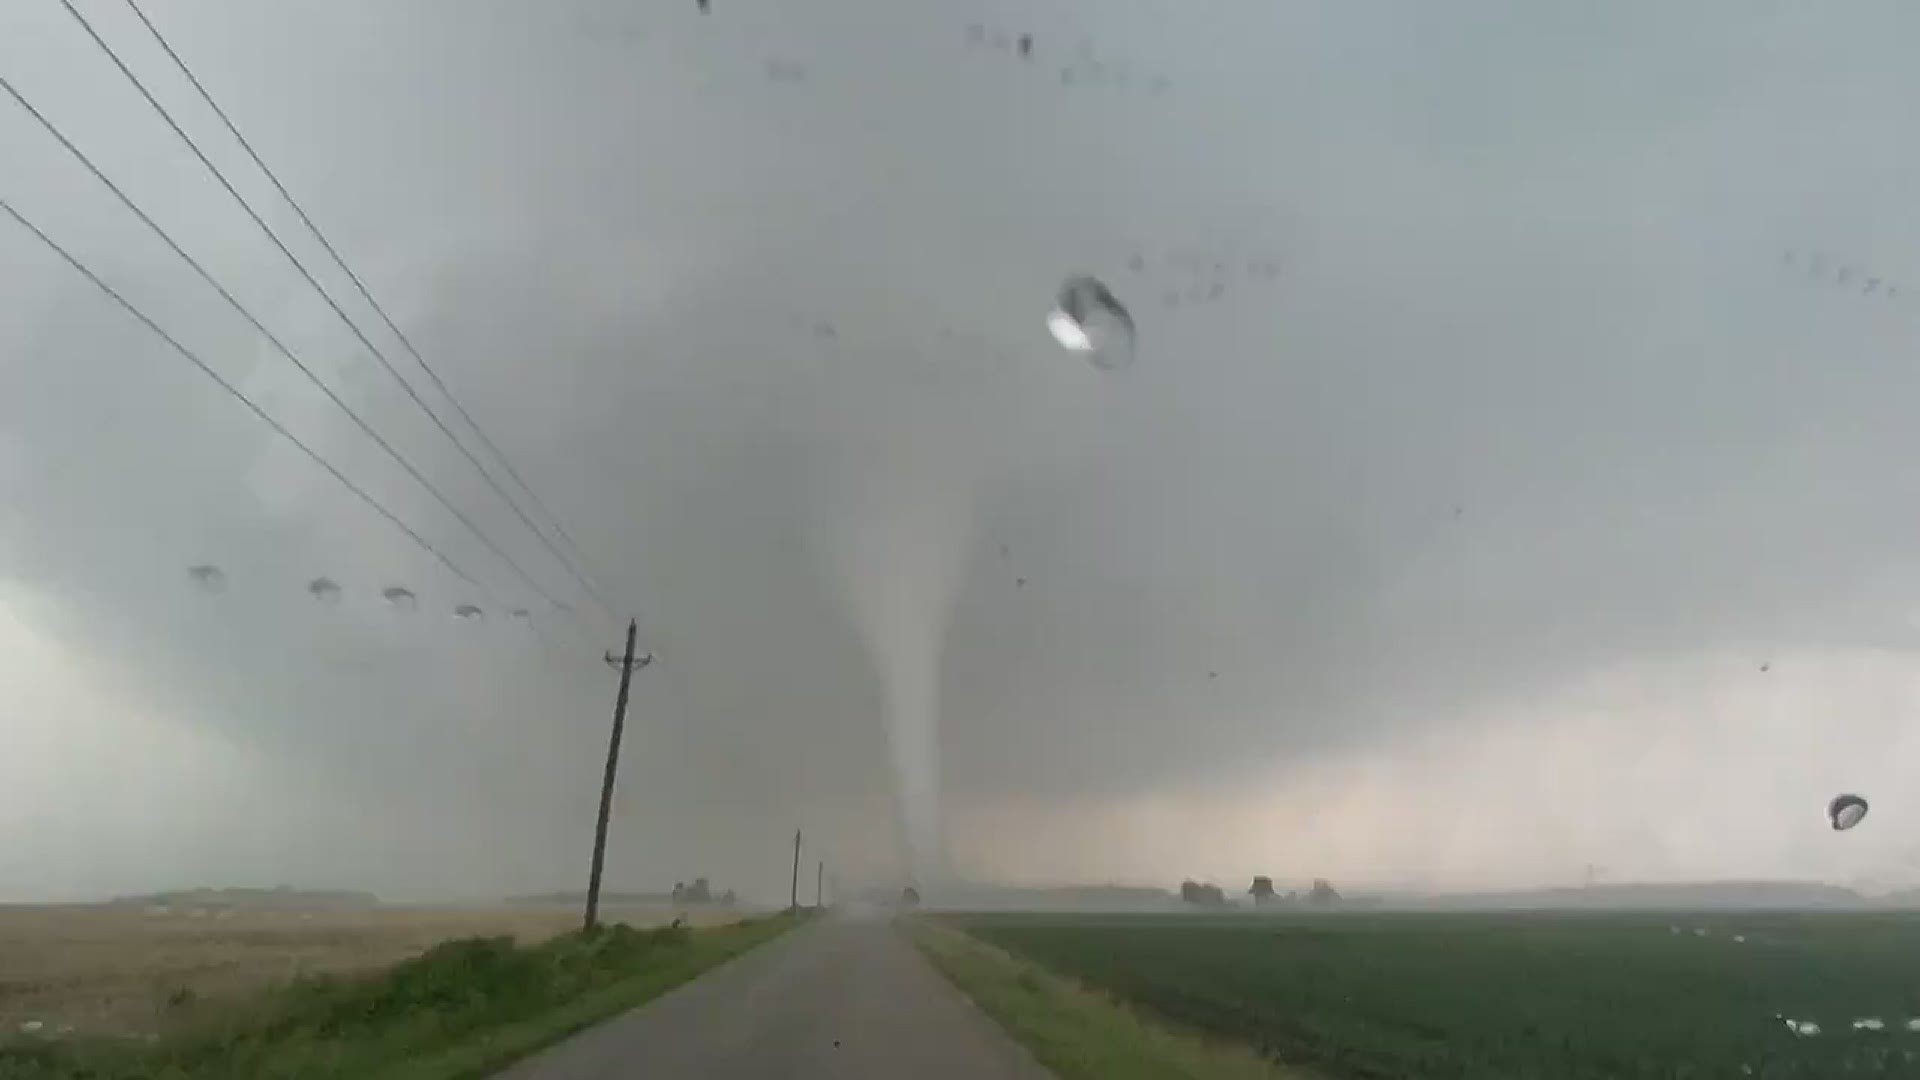 Aaron Hoevel captured video of a tornado on the ground in Jay County, Indiana at 200 N 500 E on June 18, 2021. Video is courtesy Aaron Hoevel.